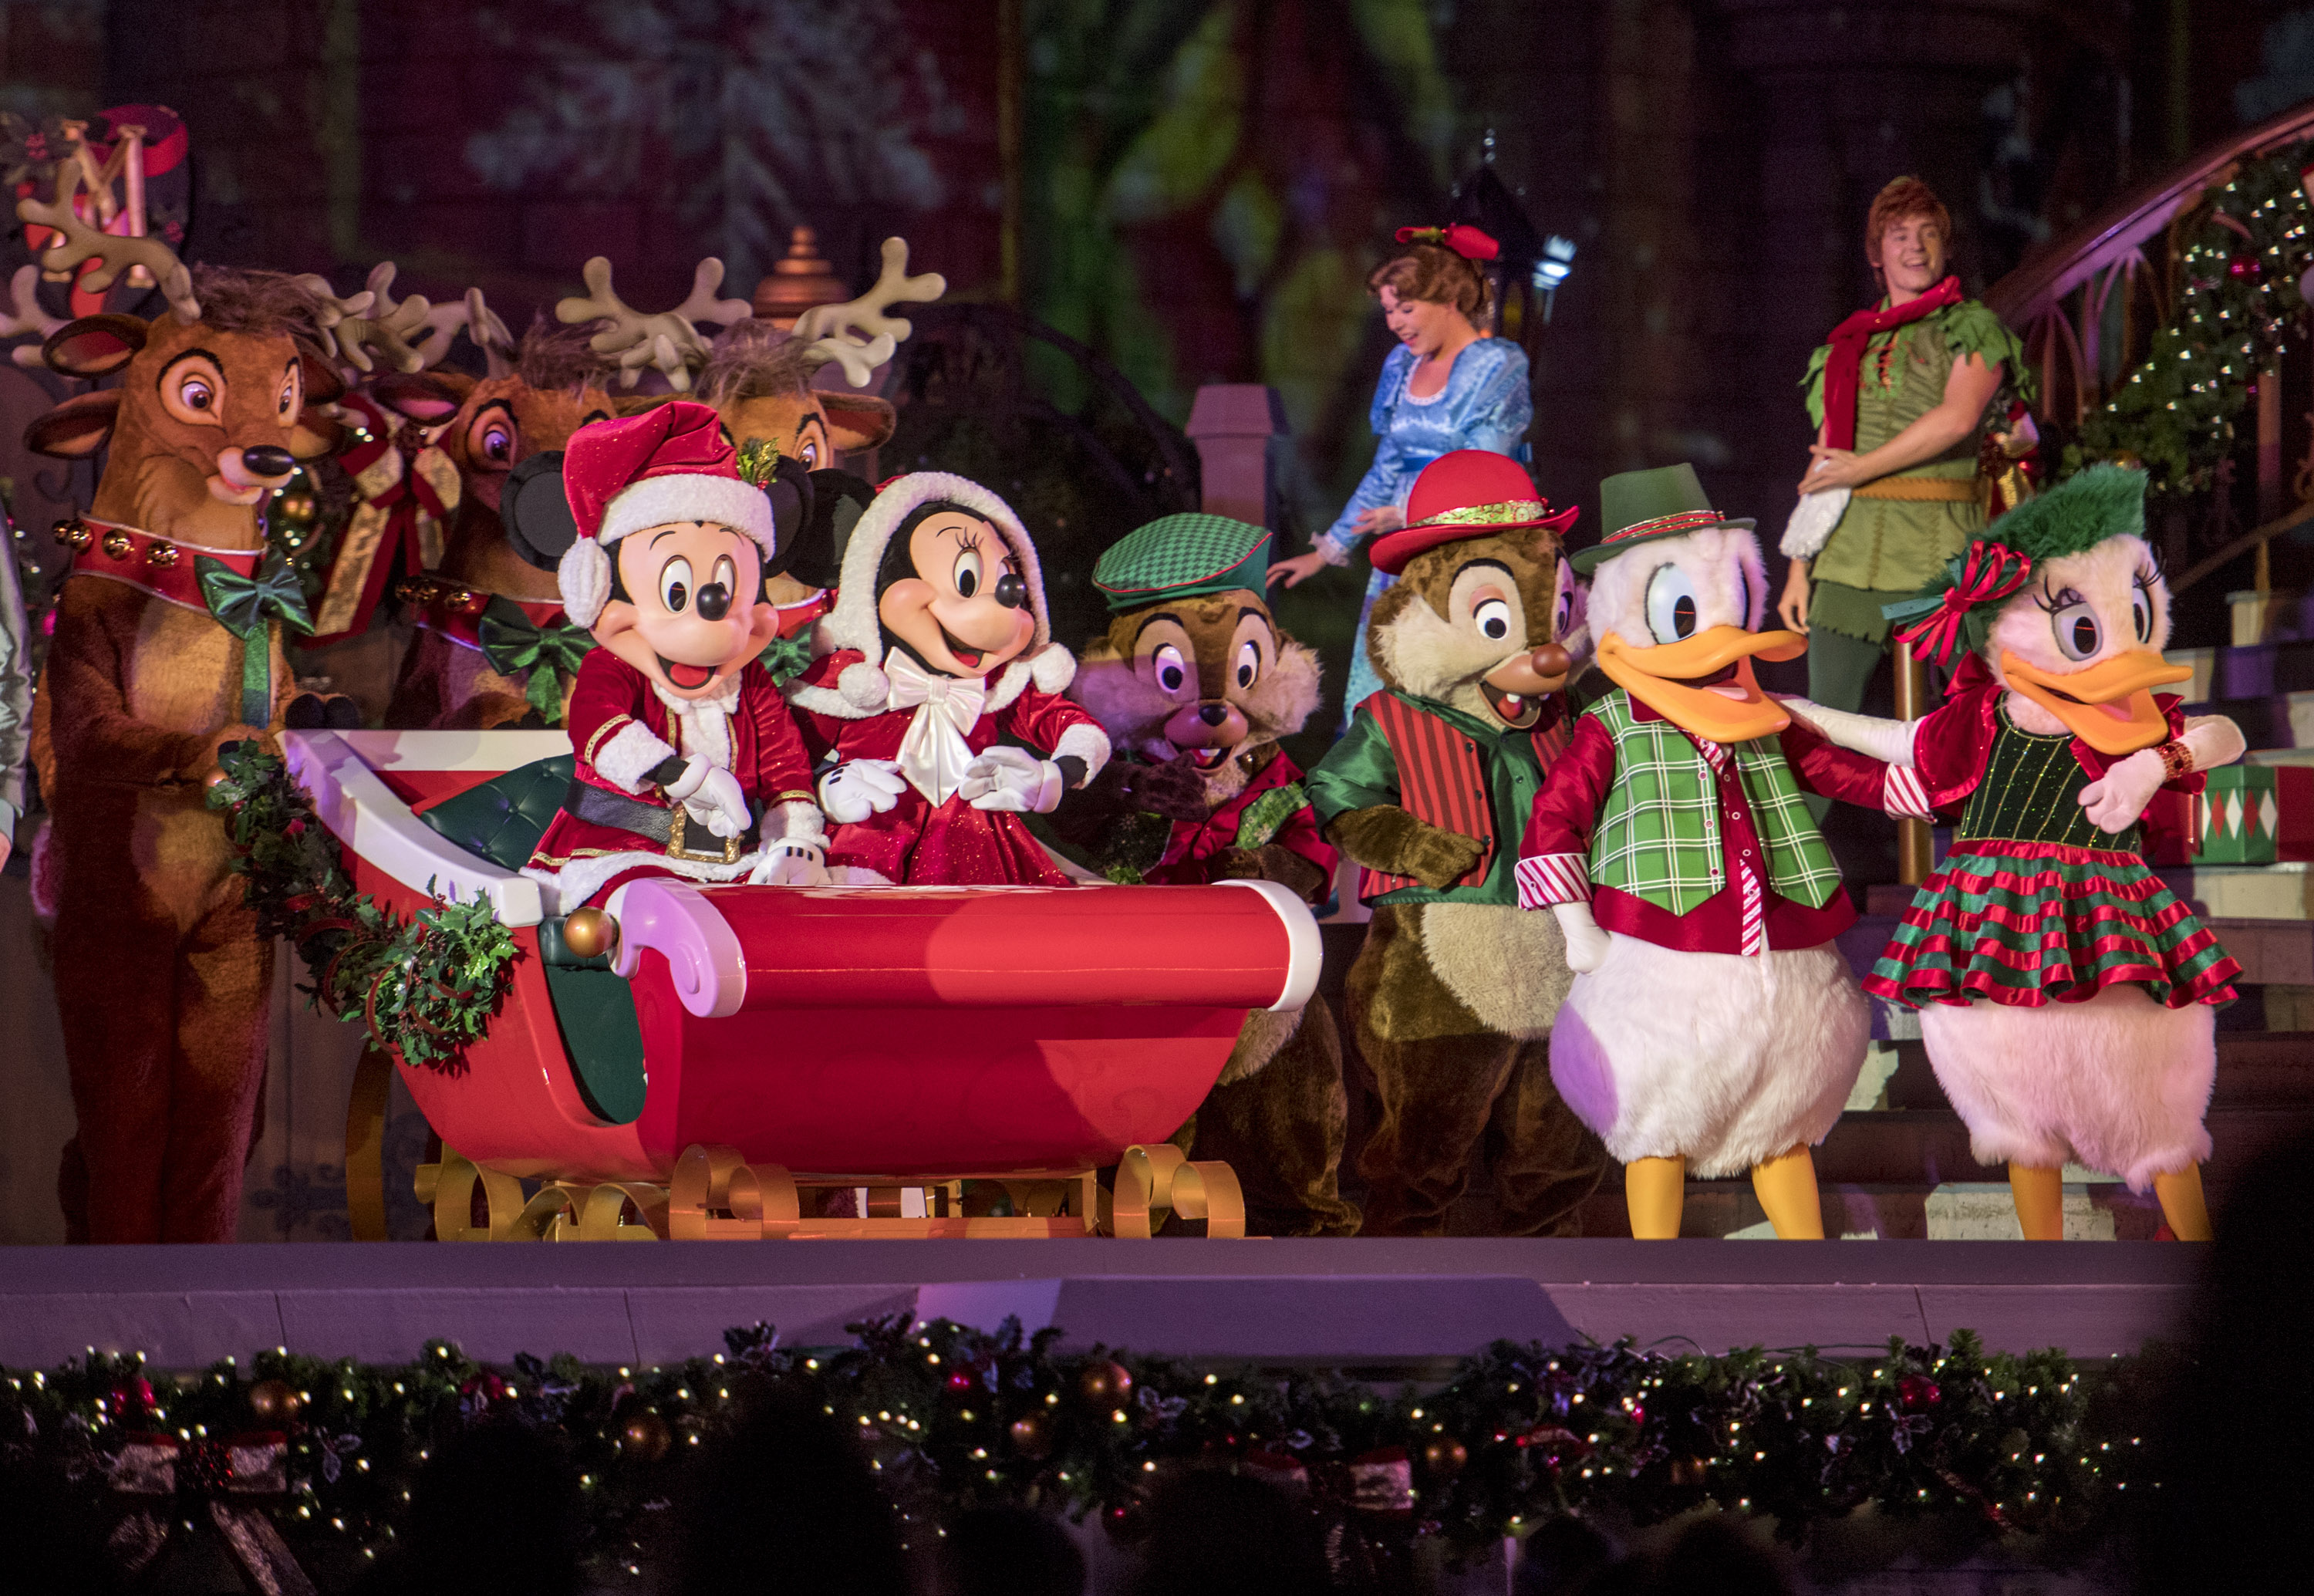 Mickey's Very Merry Christmas Party at Walt Disney World's Magic Kingdom is a festive way to get into the holiday spirit. Check out our 8 favorites from the 2017 event.